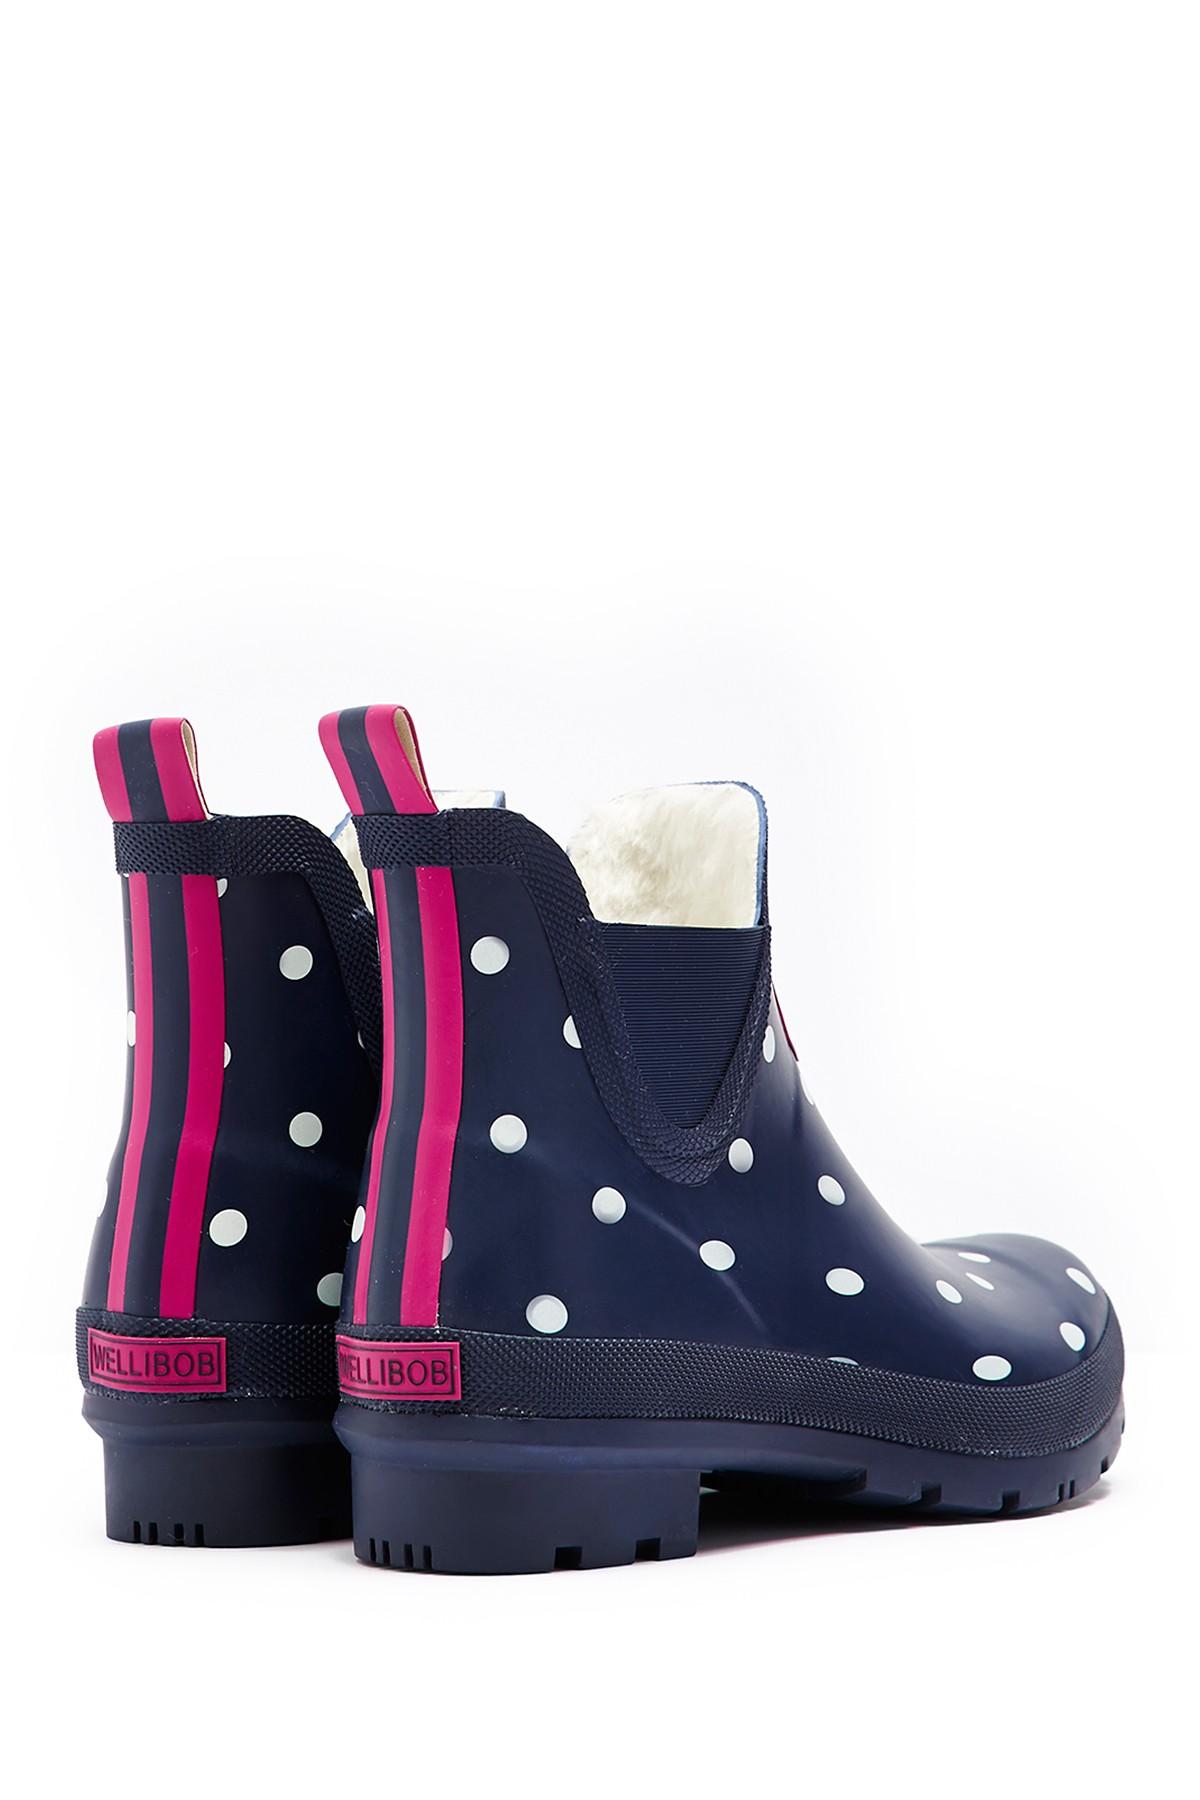 Joules Wellibob Faux Fur Lined Rain Boot in Blue Lyst